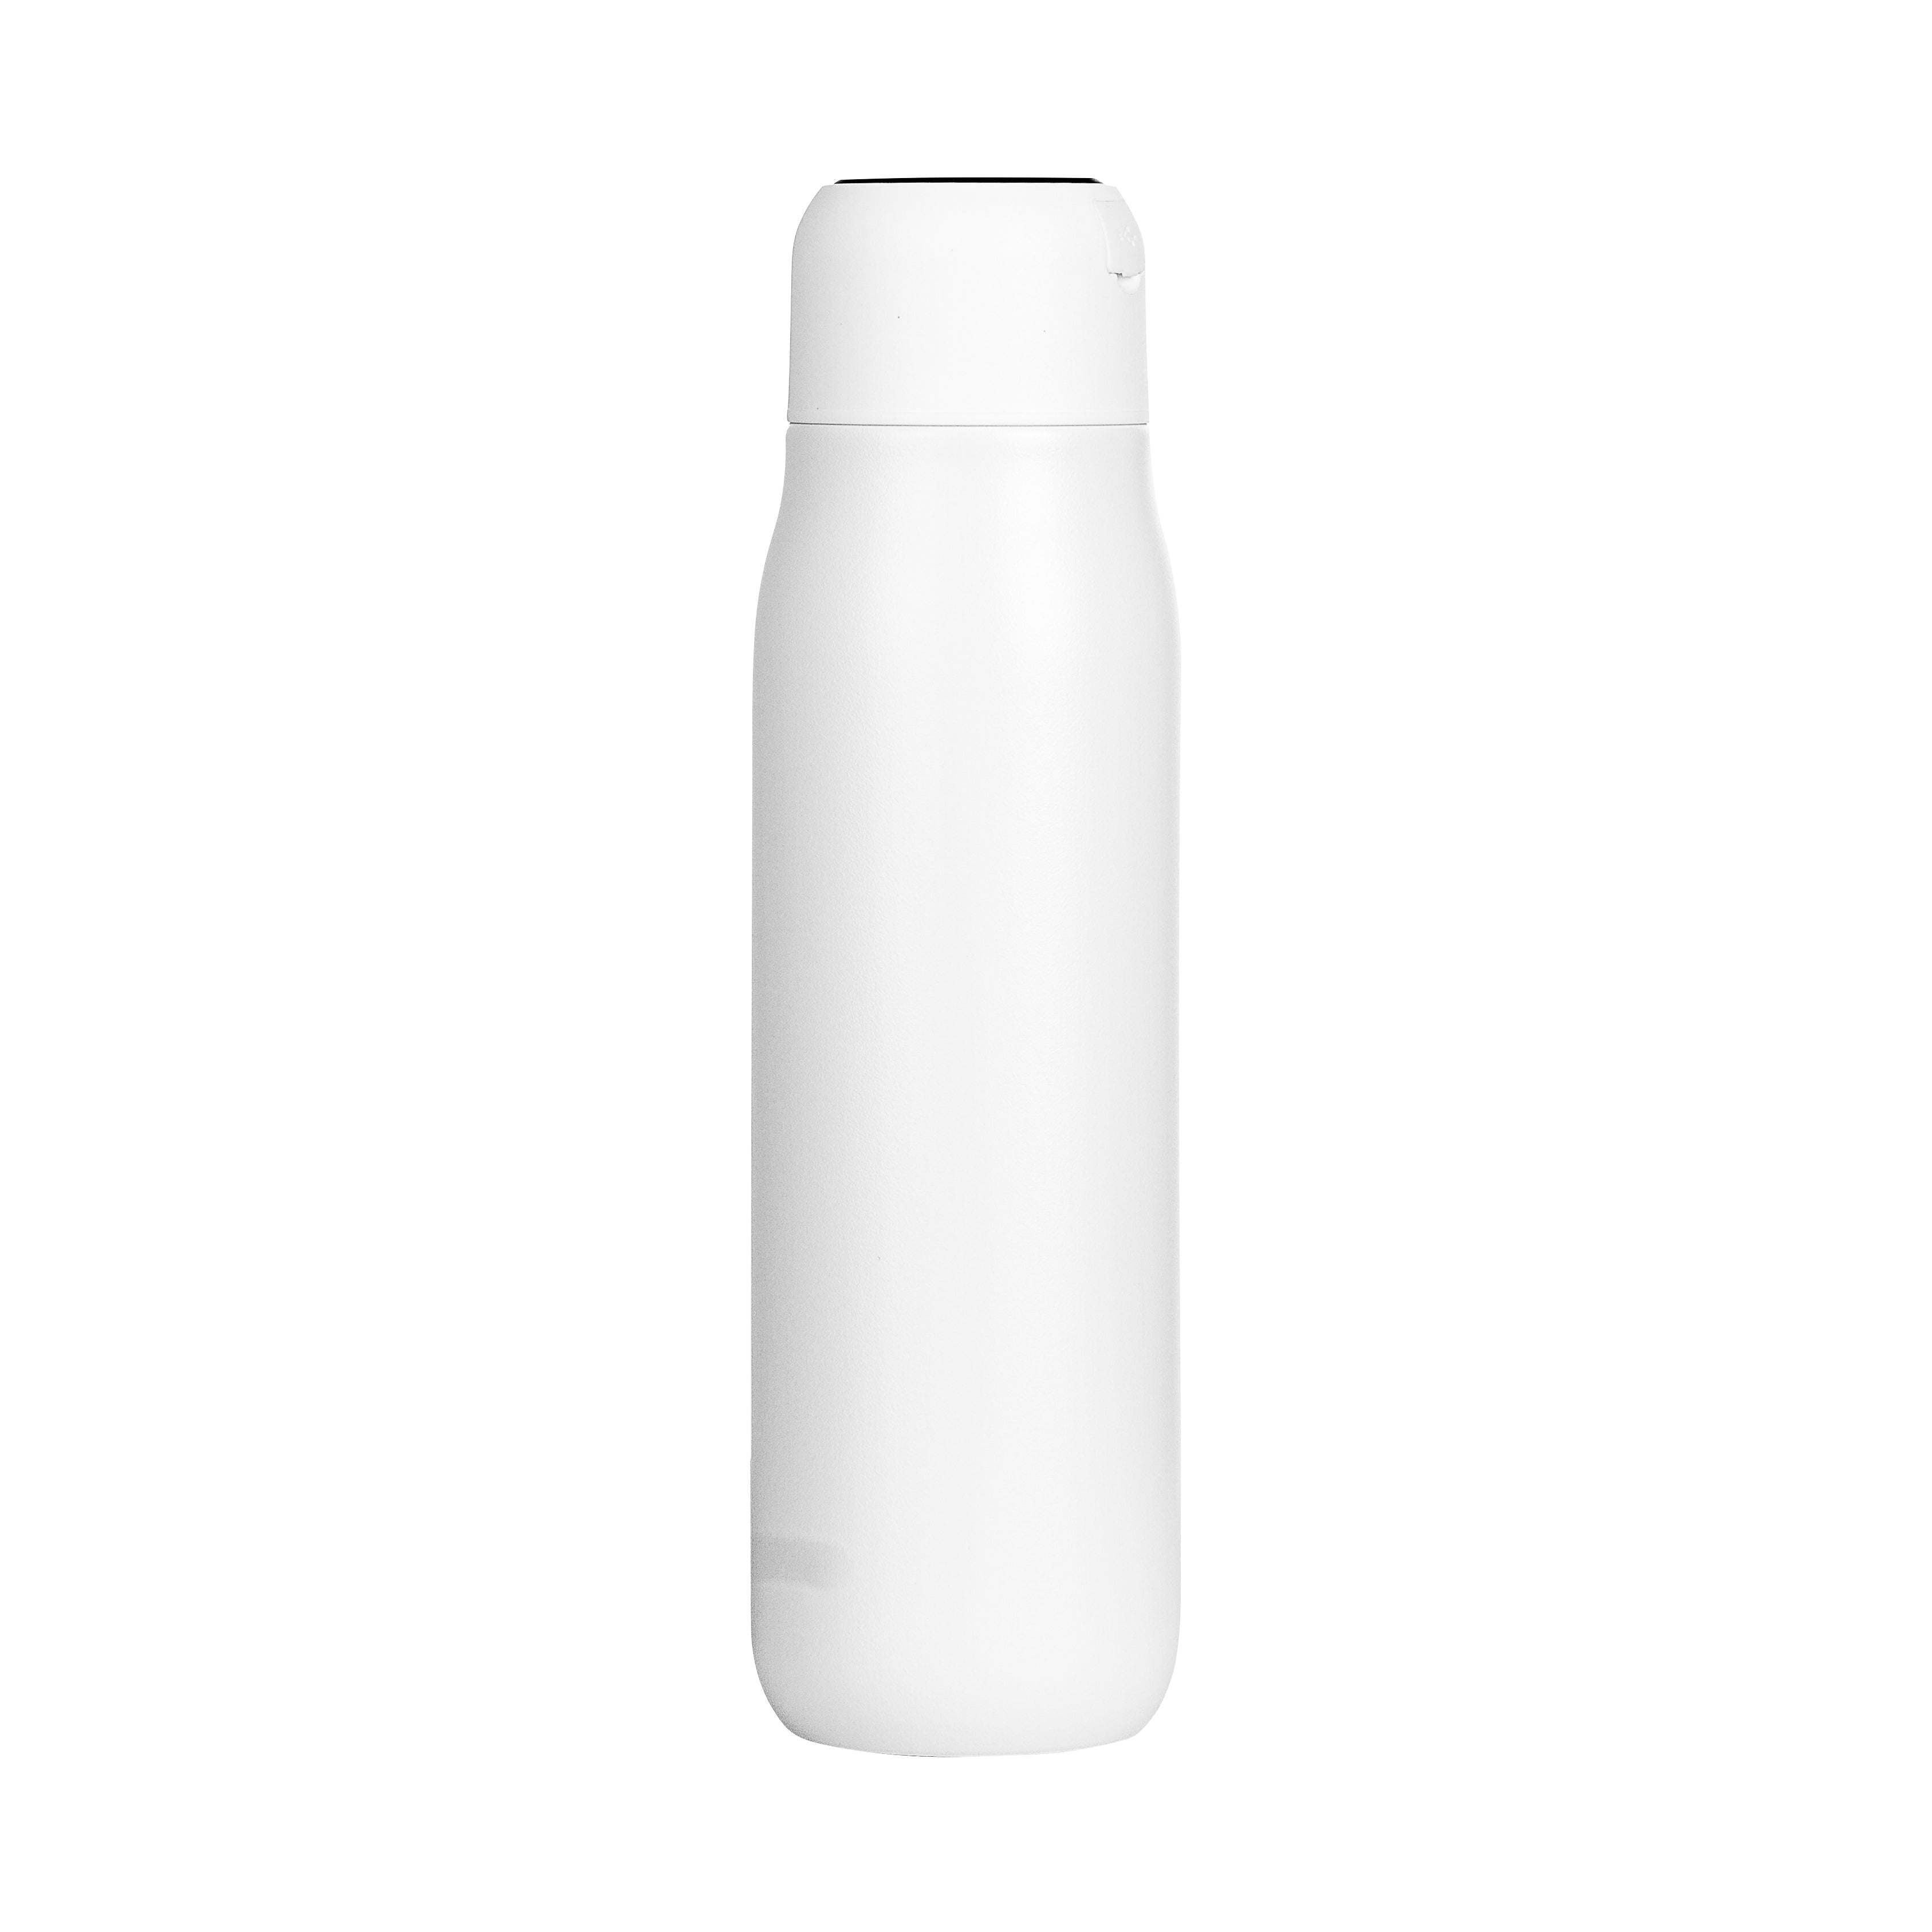 BROOC UV-C Self-Cleaning Insulated Bottle